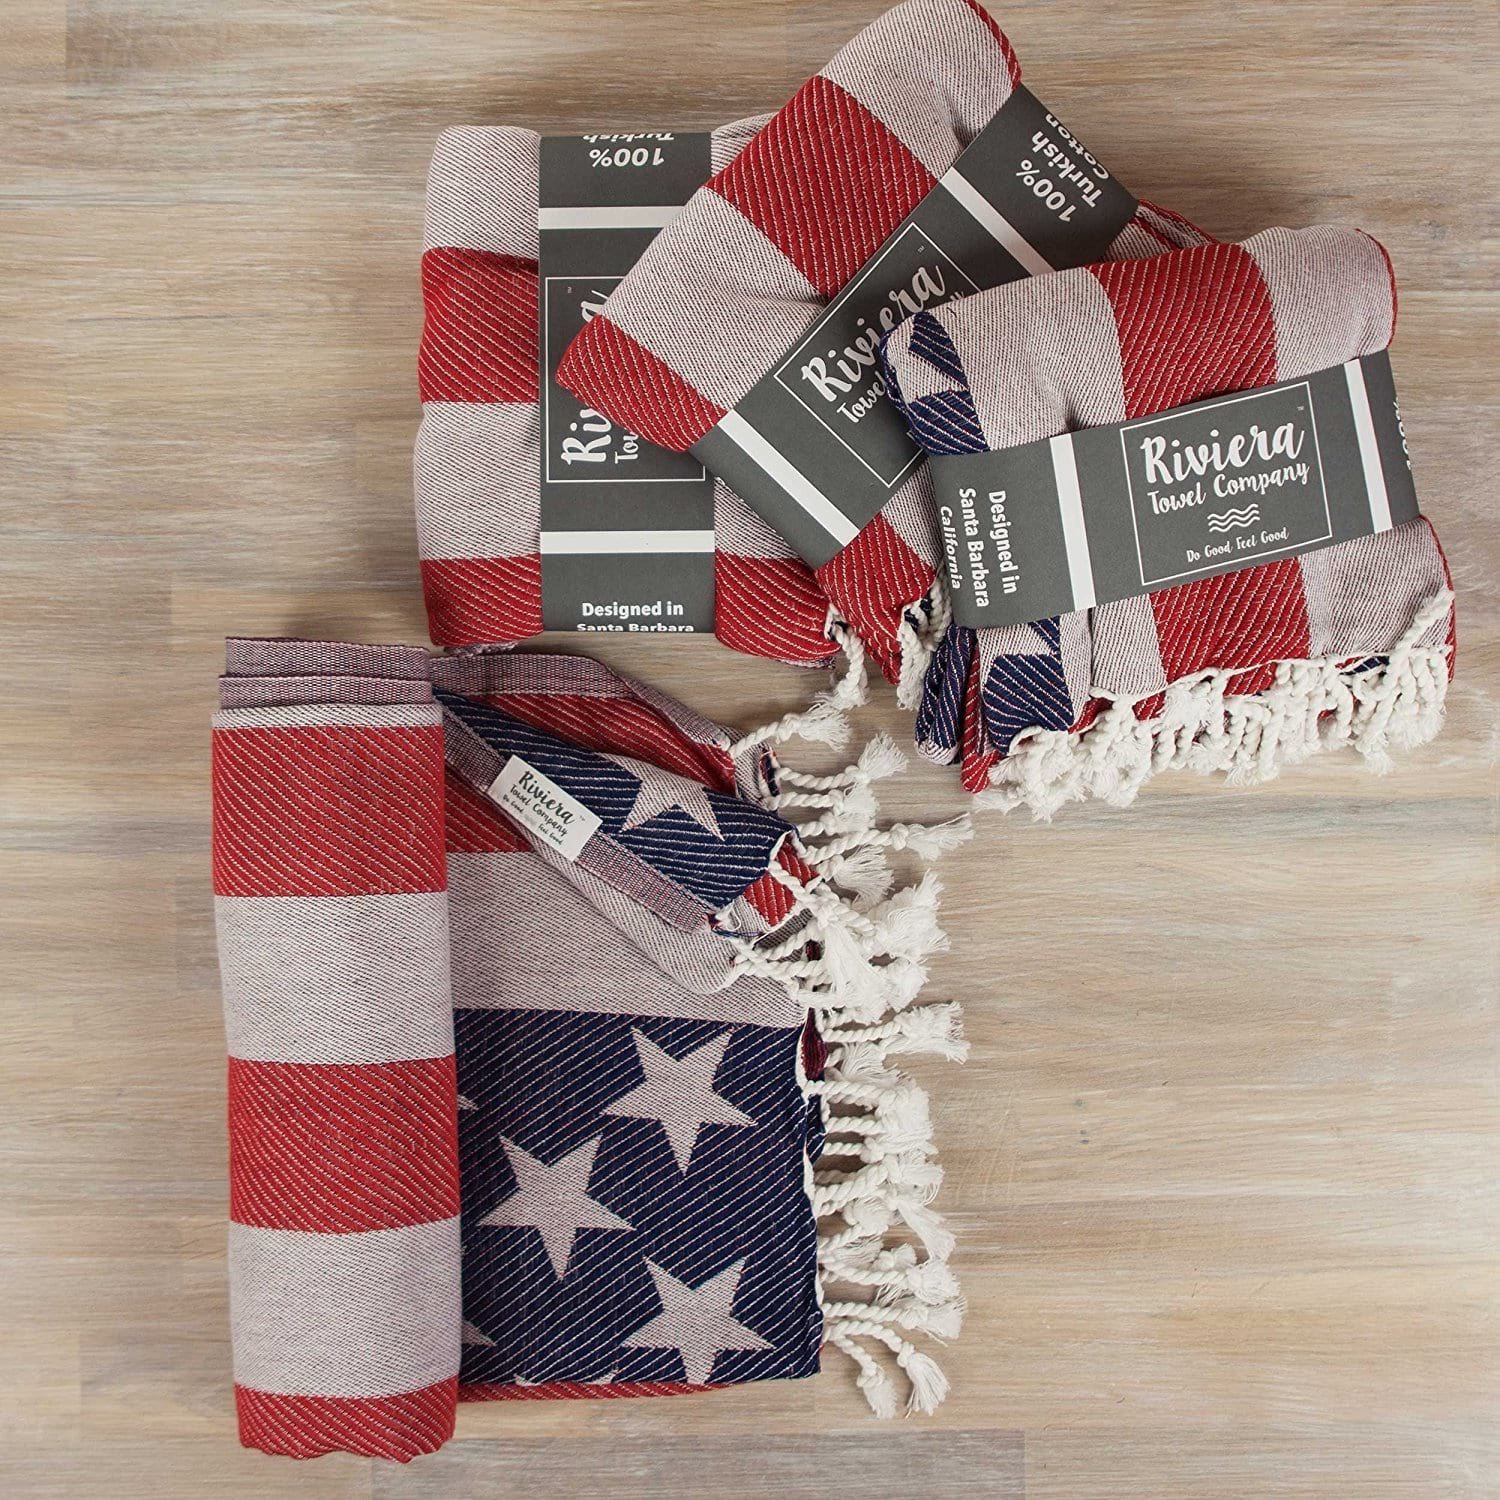 American Flag Towel - Pre-Order Now! - The Riviera Towel Company